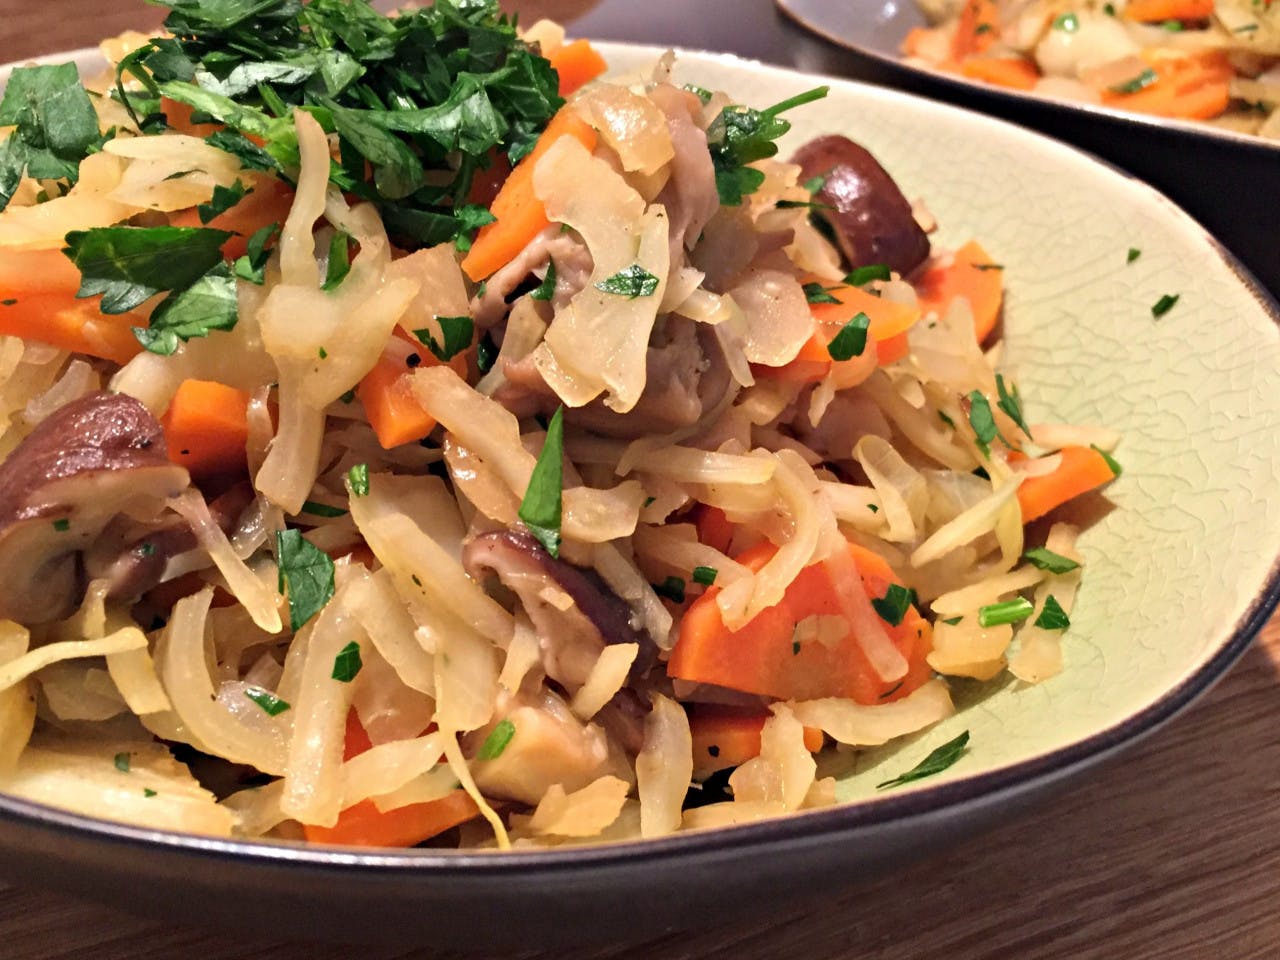 Stir-fried white cabbage with mixed mushrooms